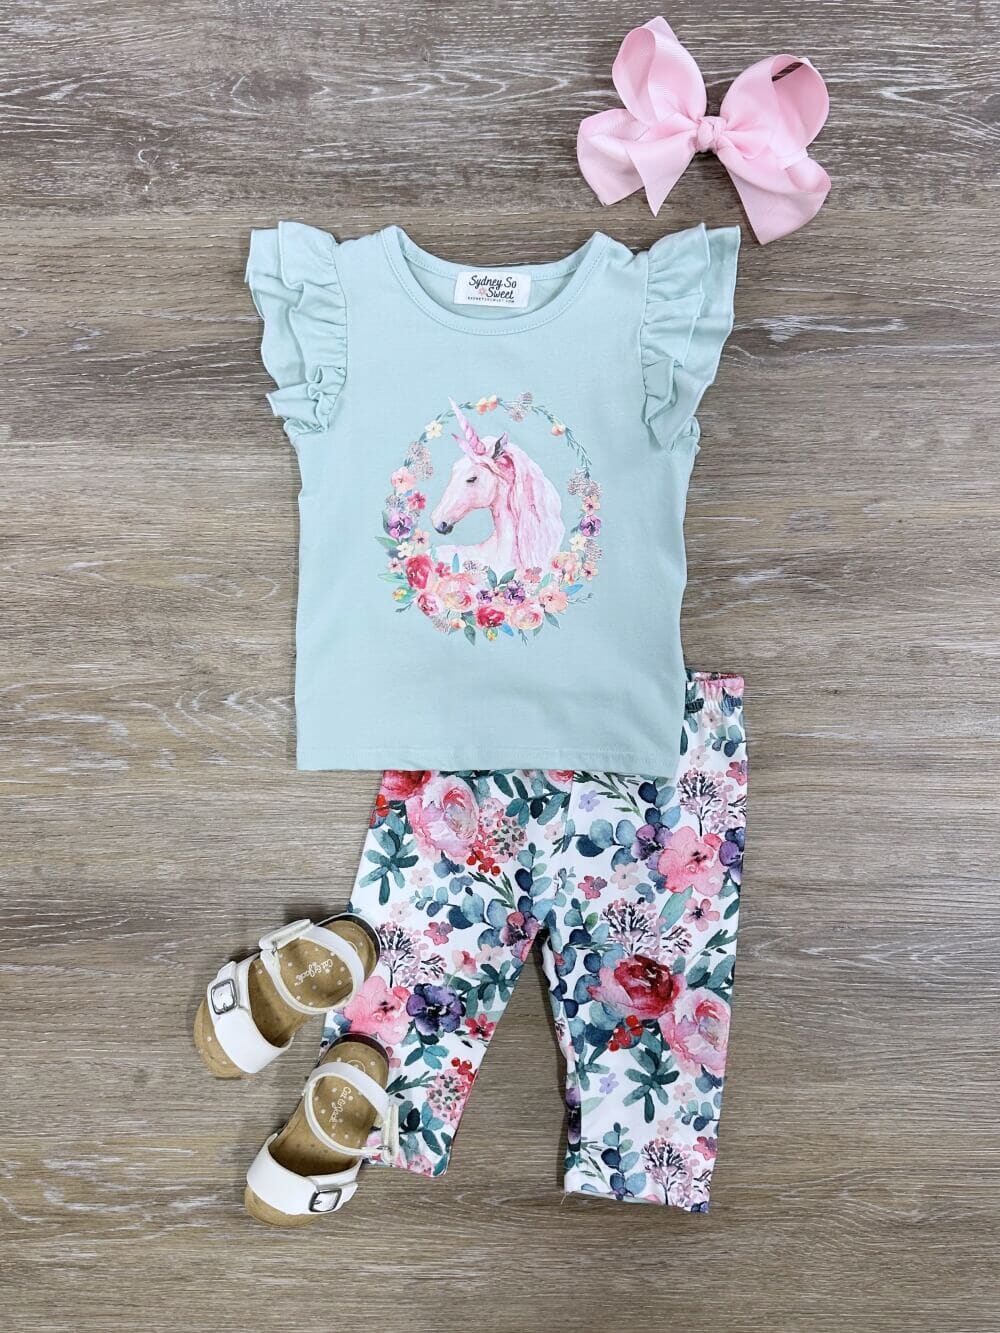 The Little Mermaid ©Disney tank top and shorts set - Sets - CLOTHING - Baby  Girl - Kids 